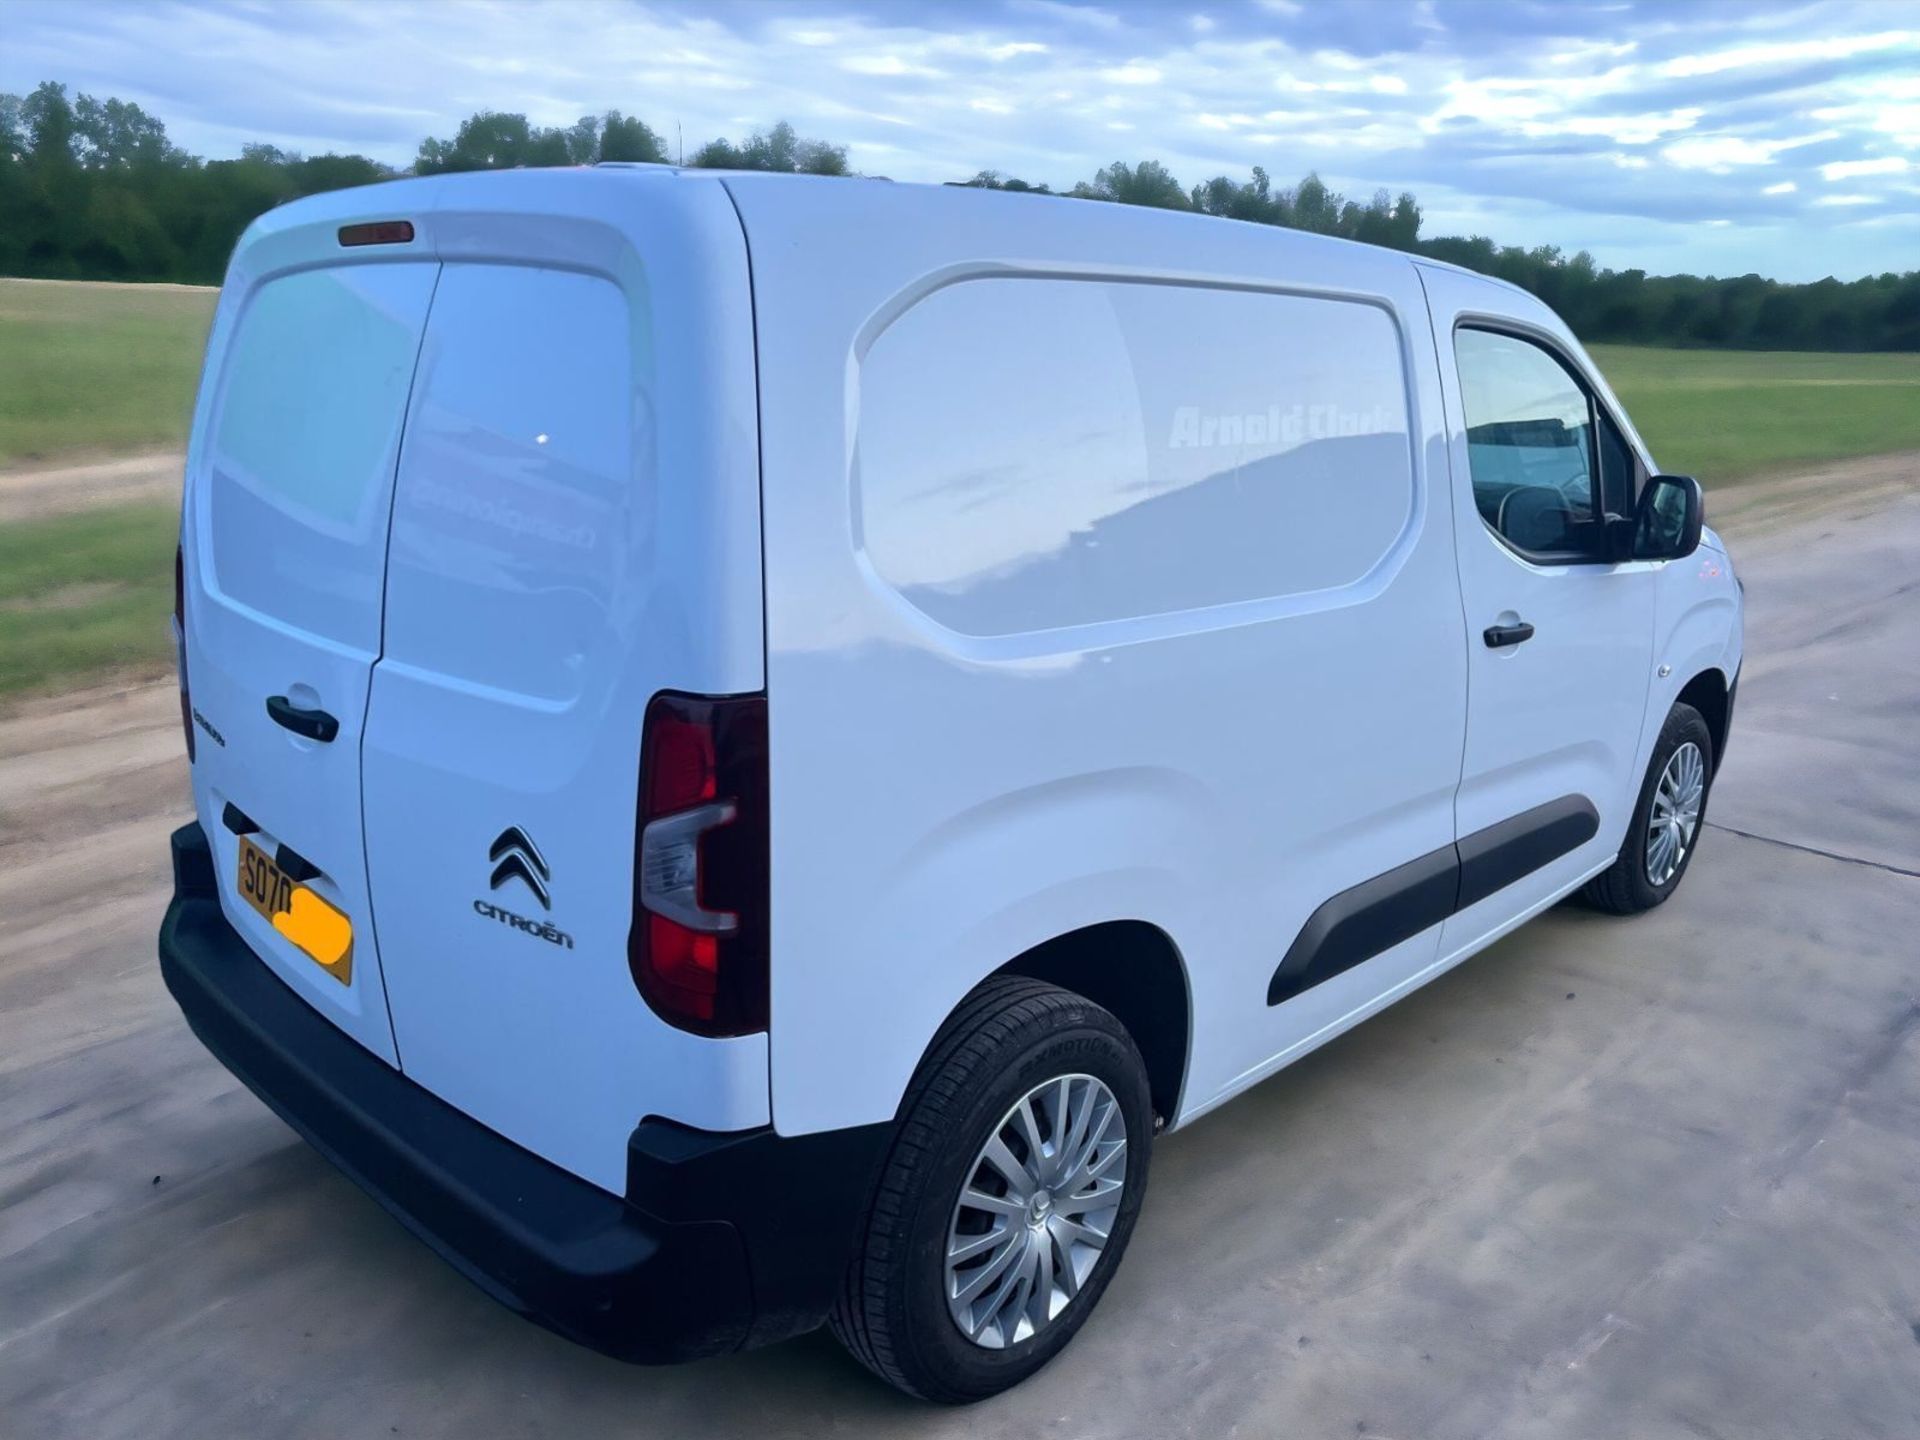 2021 CITROEN BERLINGO ENTERPRISE HDI VAN - COMPACT AND FEATURE-PACKED - Image 2 of 15